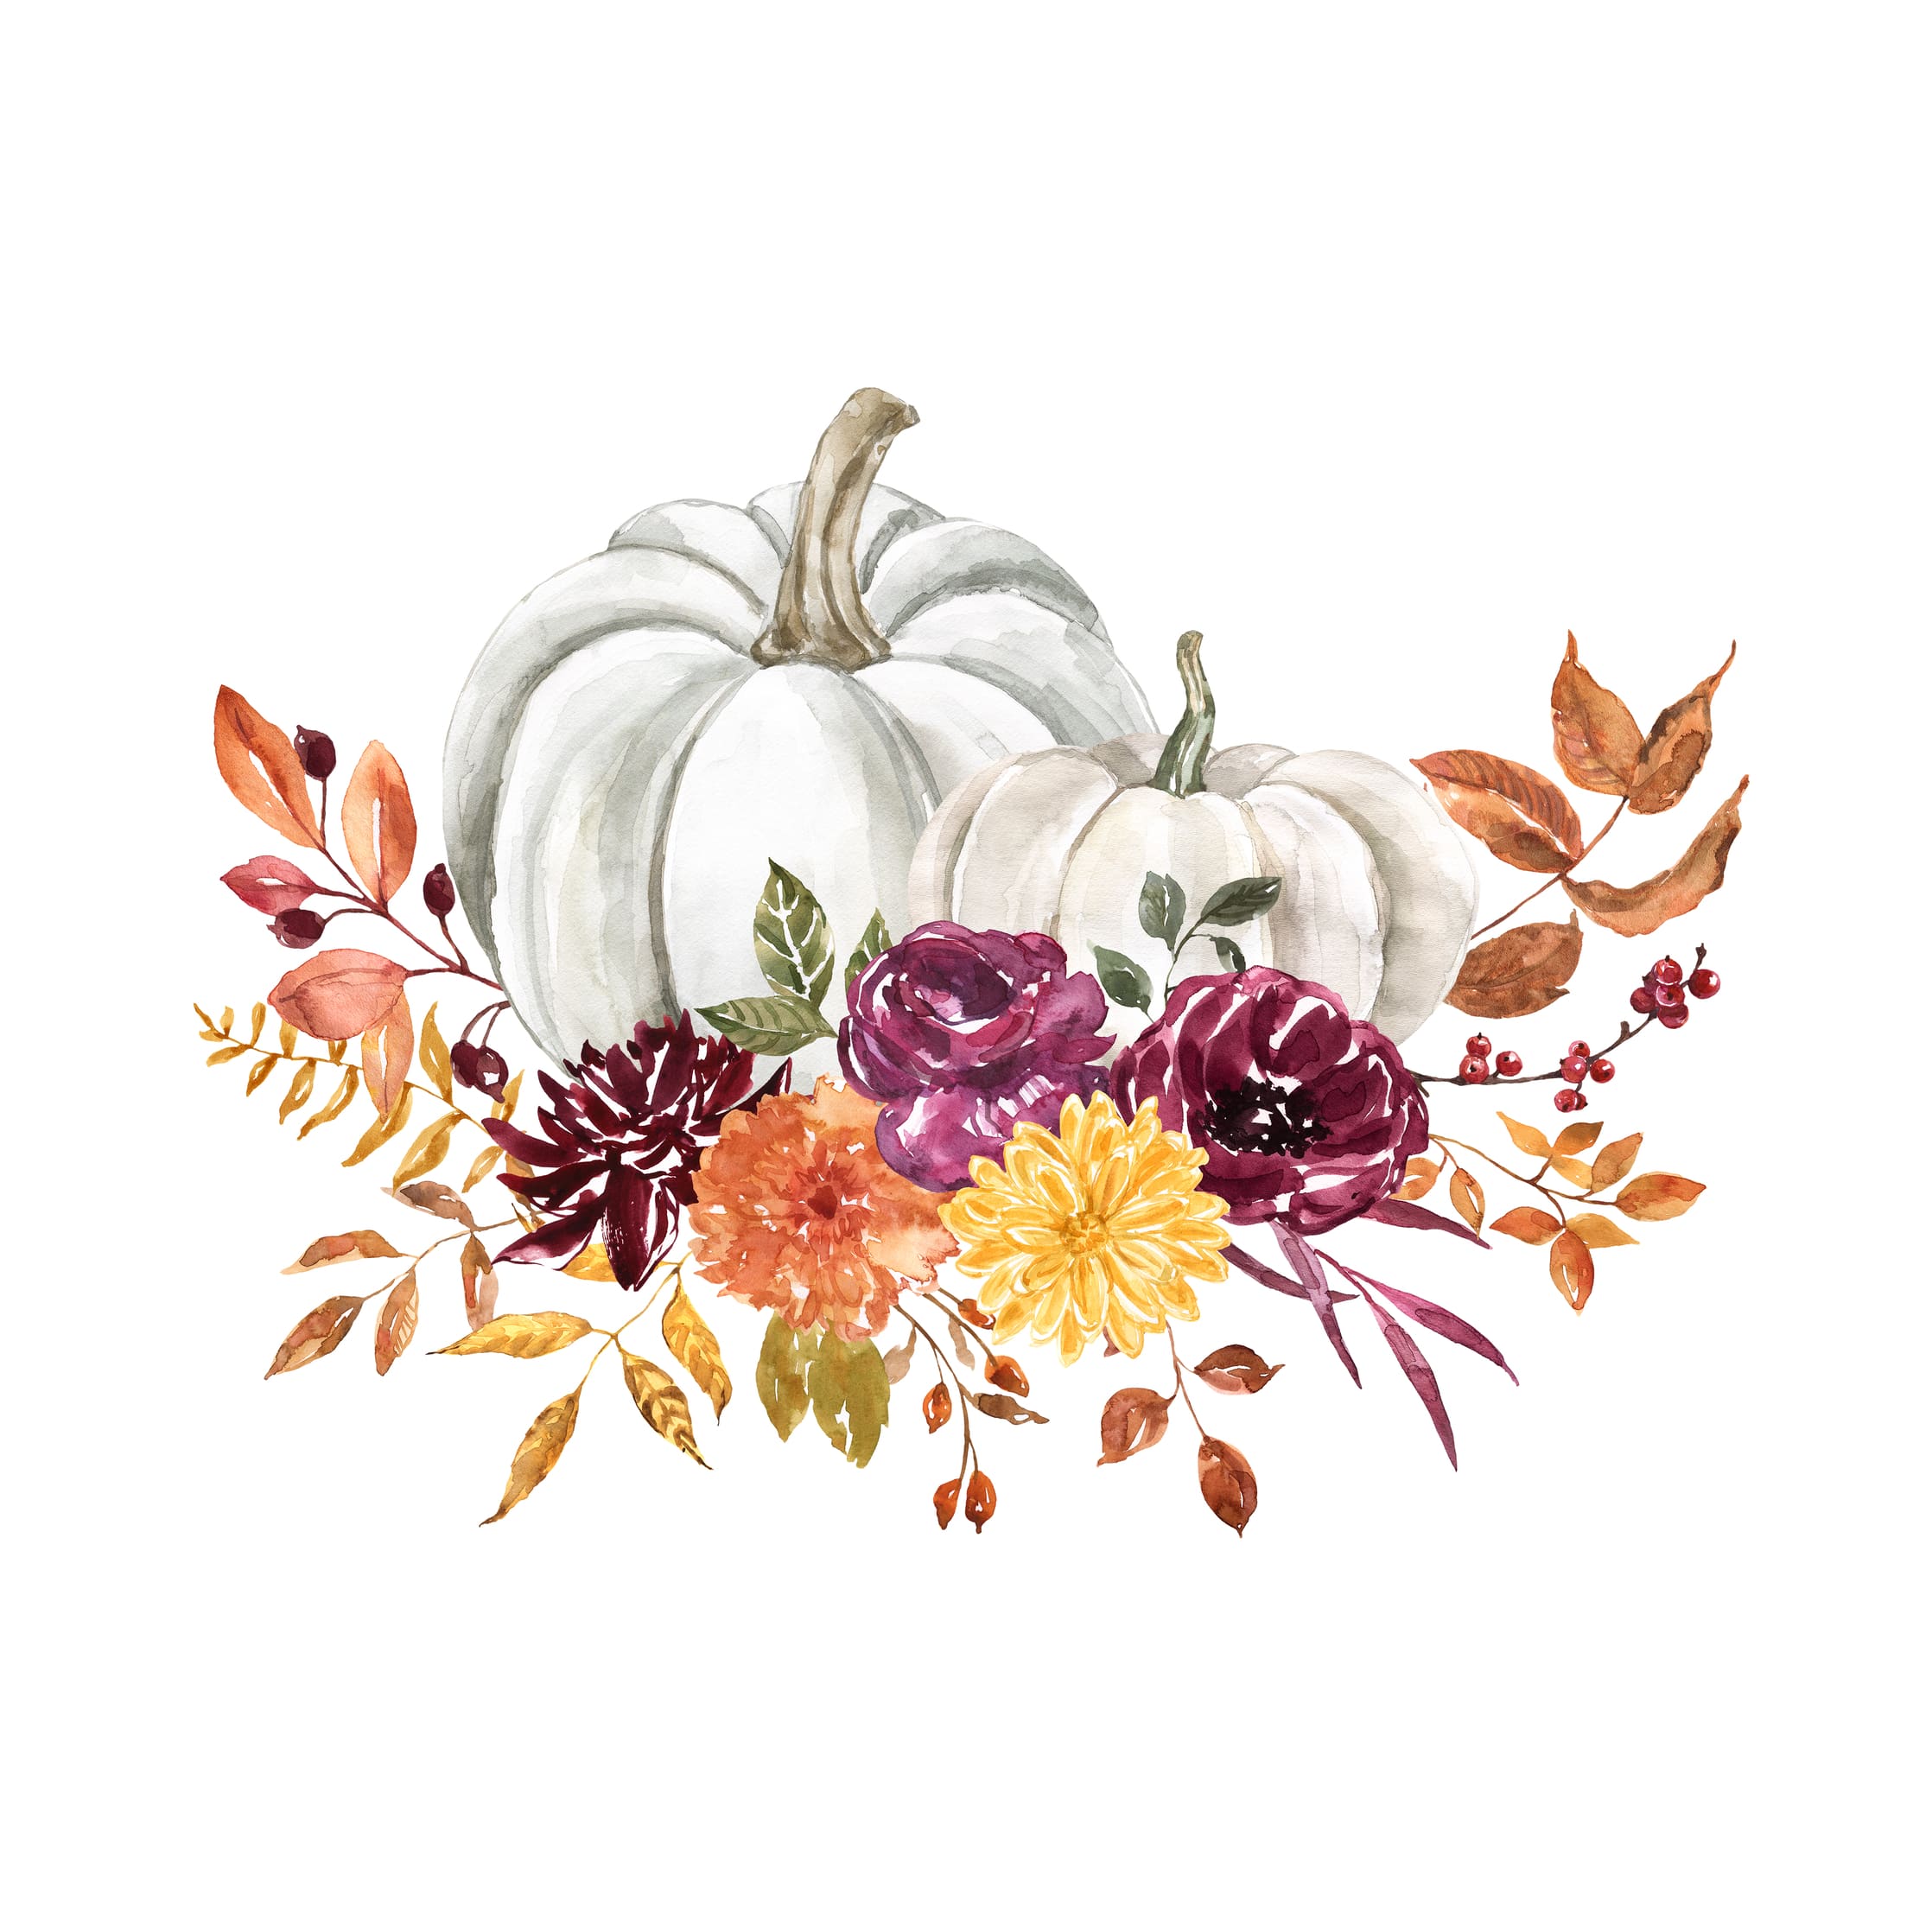 Hand painted pumpkins and dried flowers